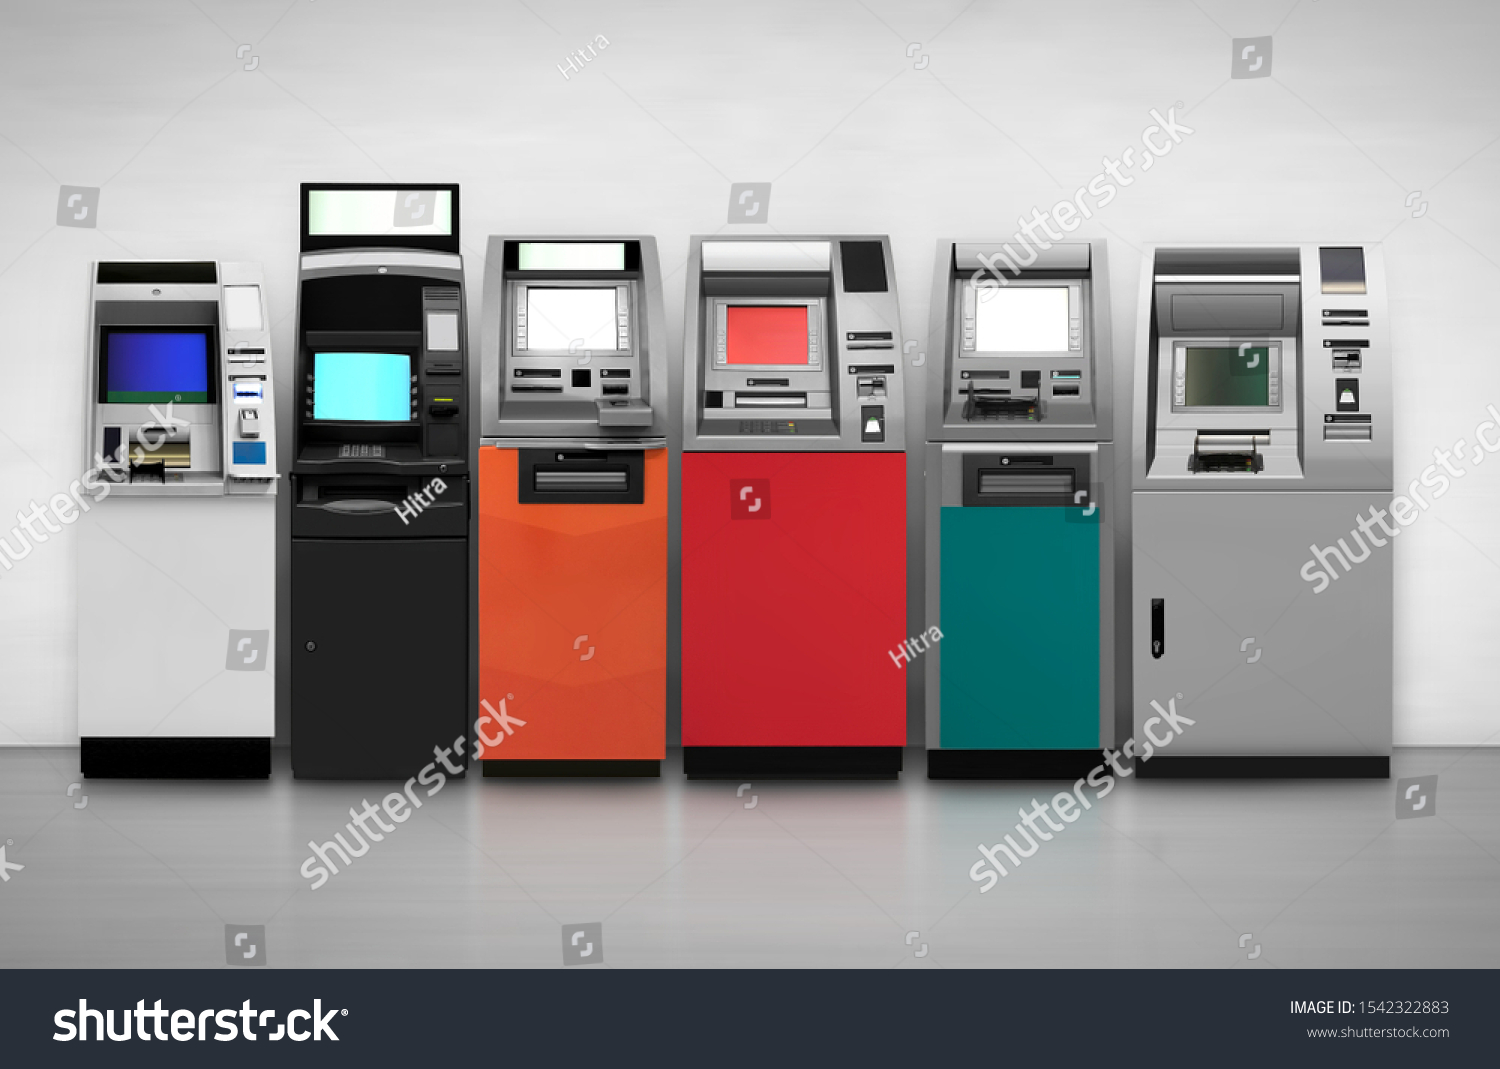 ATM self standing Smaller indoor ATMs dispense money inside convenience stores. Suitable for presenting new bank logo or new bank designs and cash campaigns. #1542322883